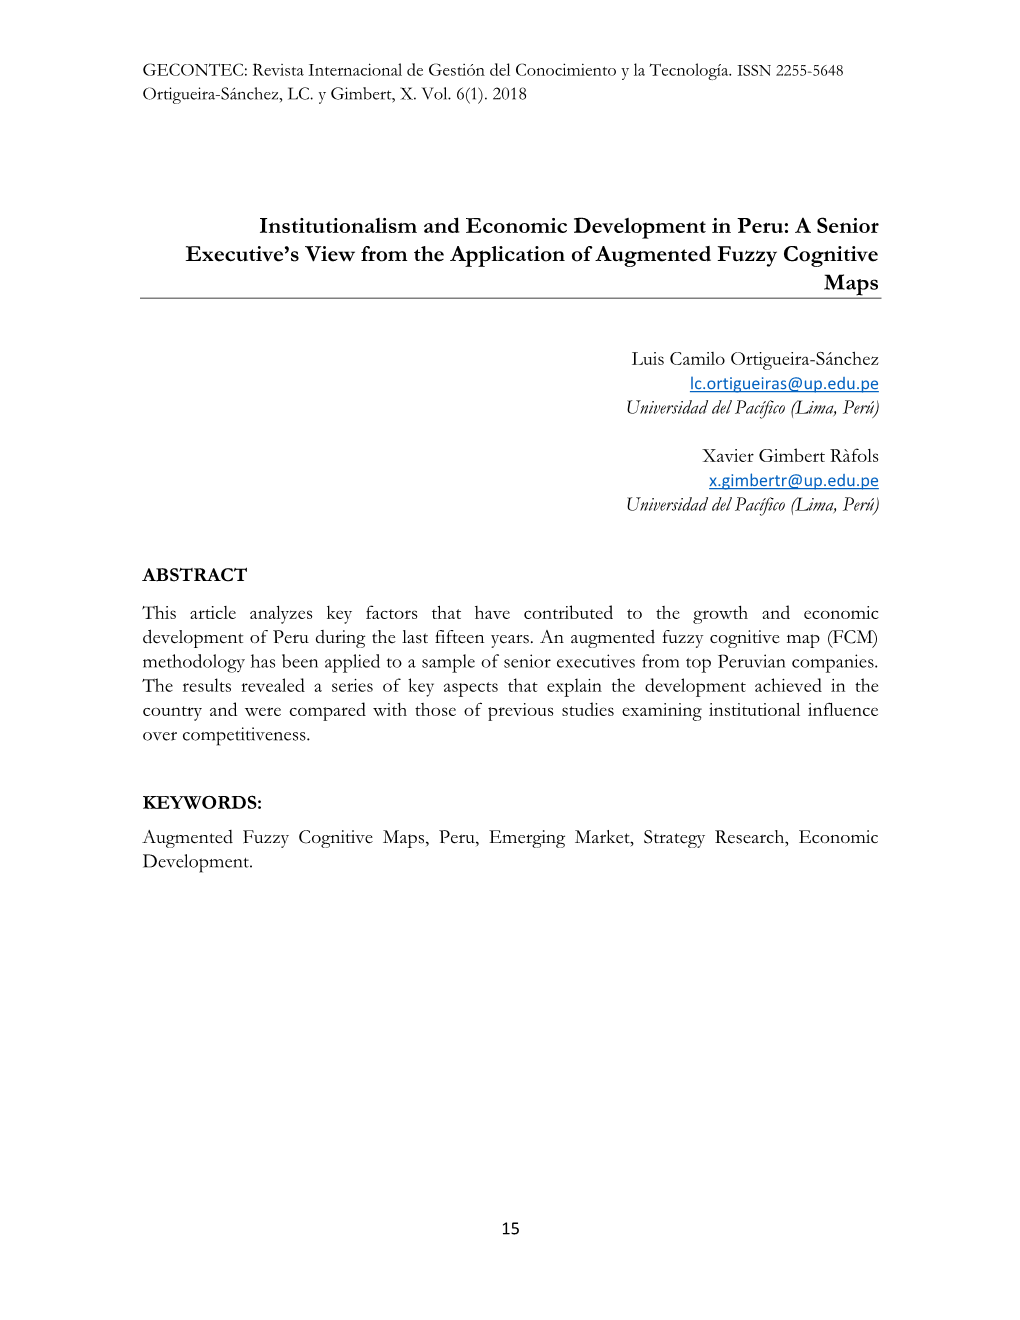 Institutionalism and Economic Development in Peru: a Senior Executive’S View from the Application of Augmented Fuzzy Cognitive Maps